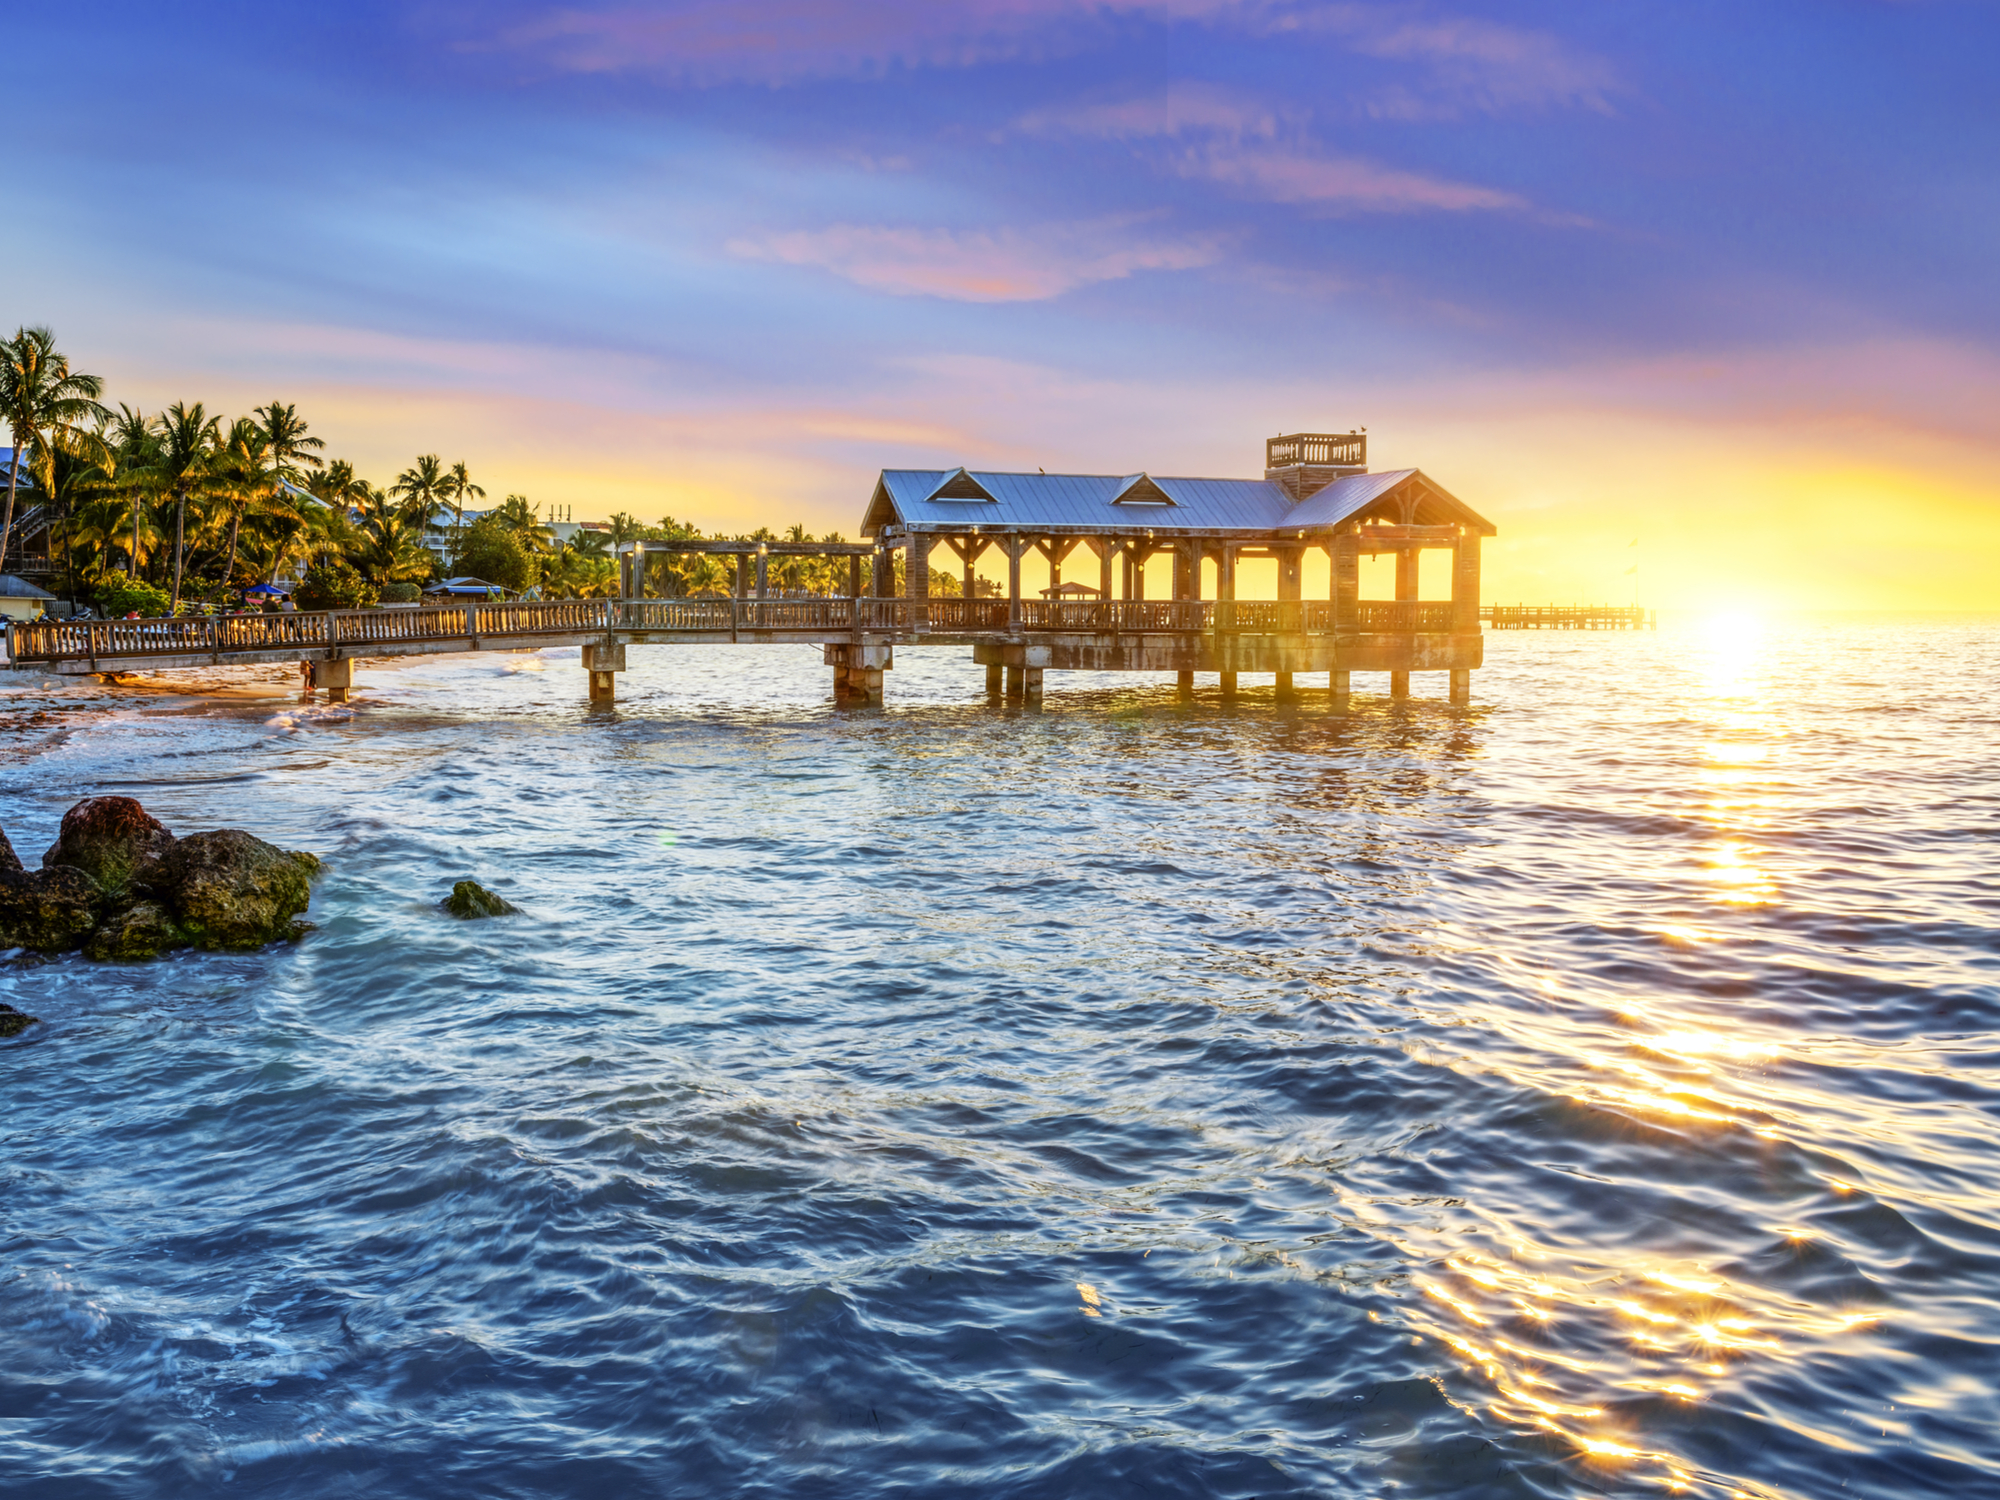 Five Fabulous Attractions Not to be Missed in the Florida Keys